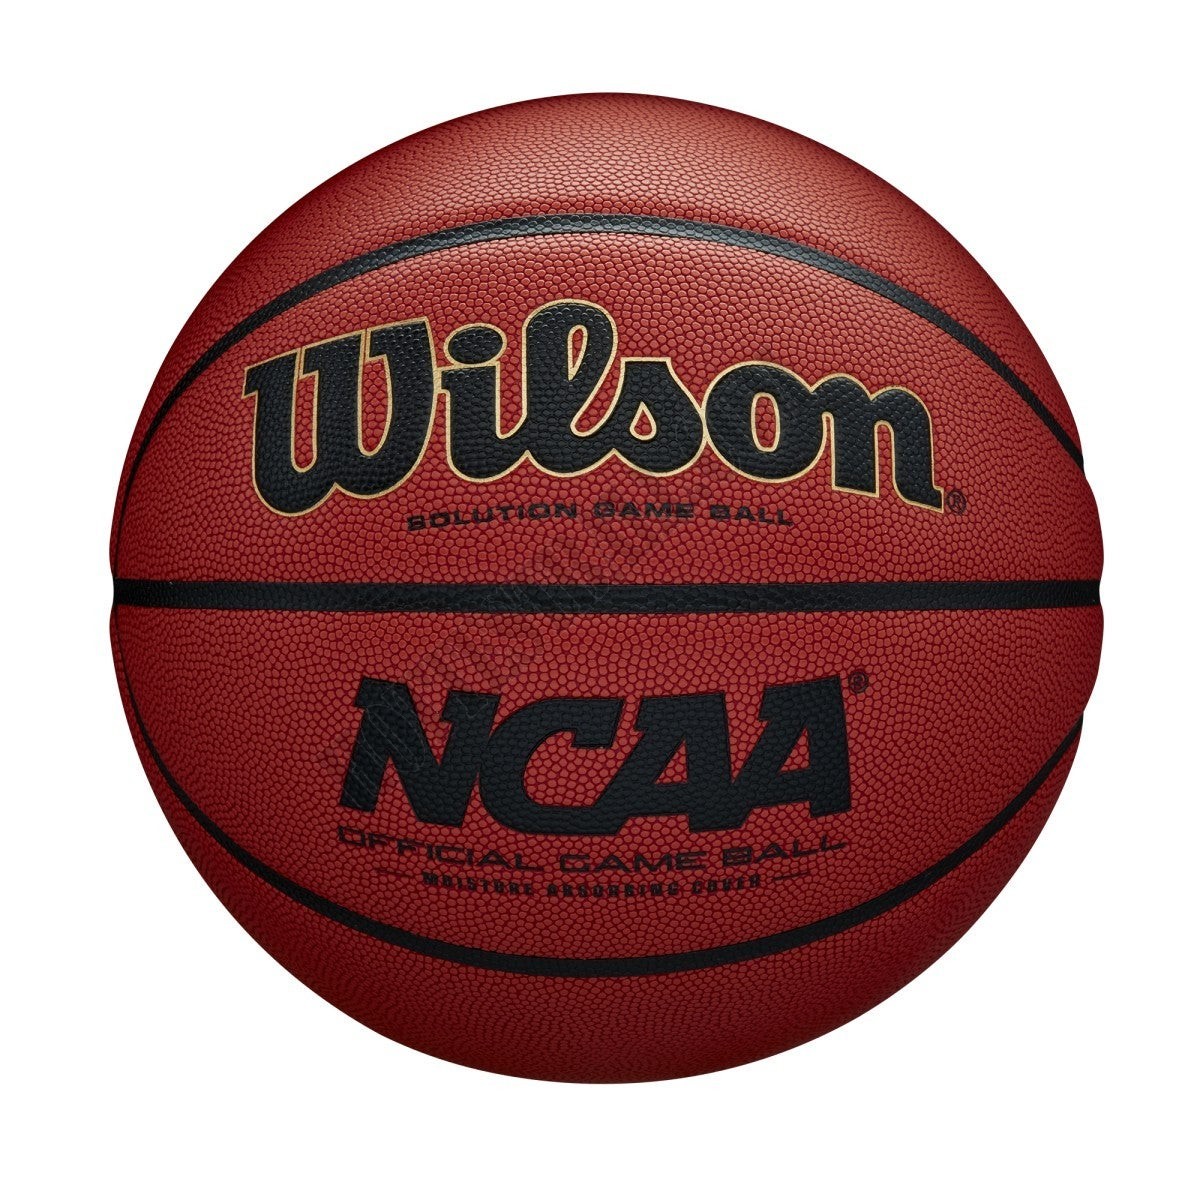 NCAA Official Game Basketball - Wilson Discount Store - NCAA Official Game Basketball - Wilson Discount Store